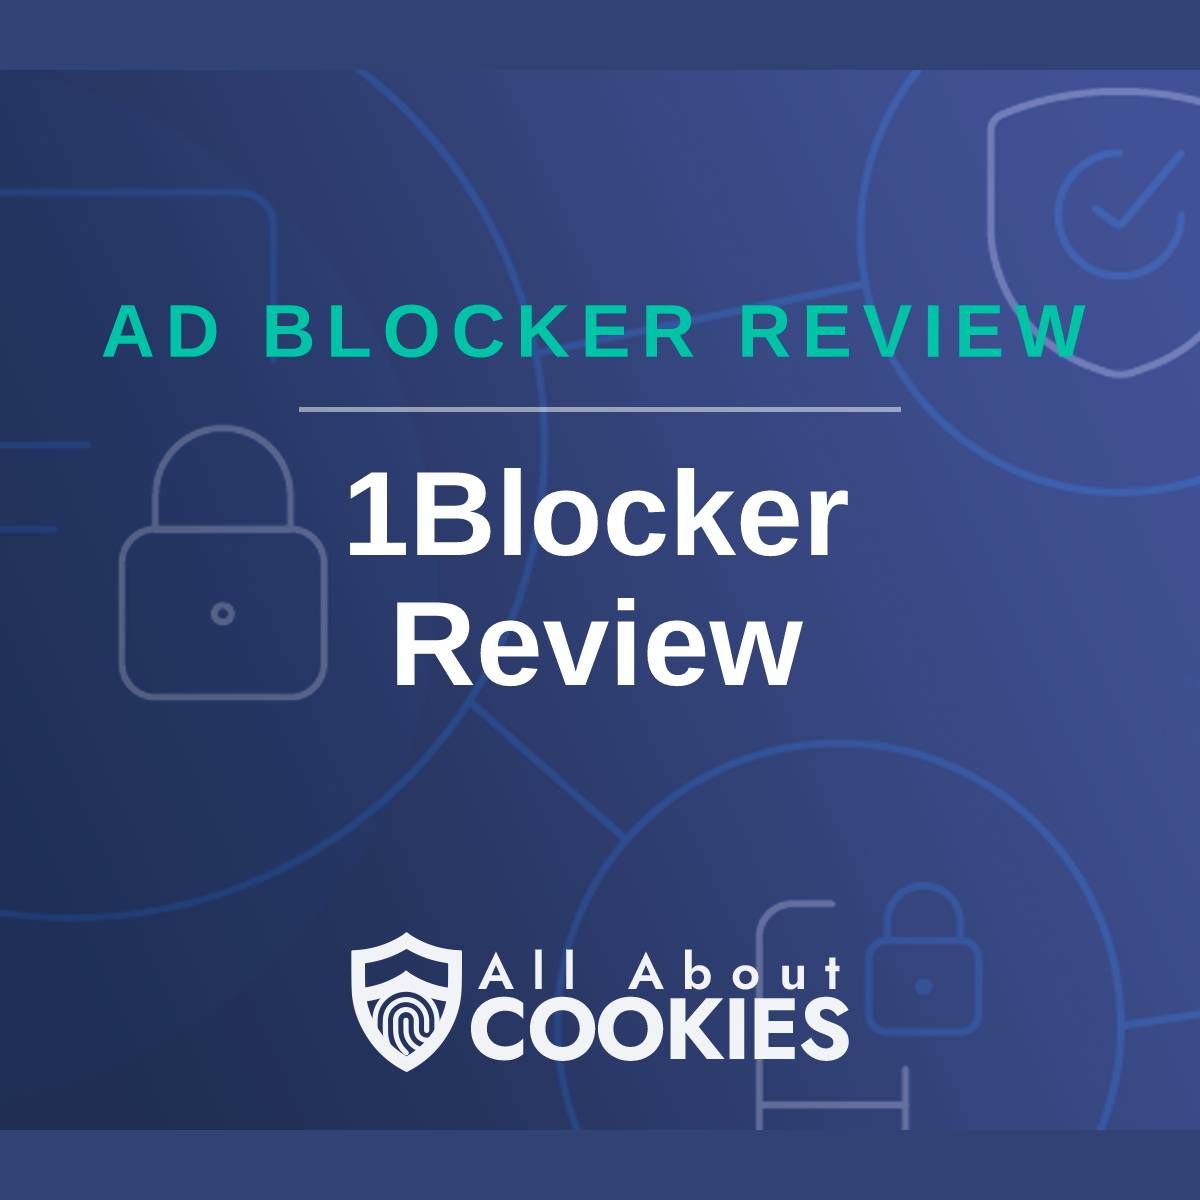 A blue background with images of locks and shields with the text "Ad Blocker Review 1Blocker Review" and the All About Cookies logo. 